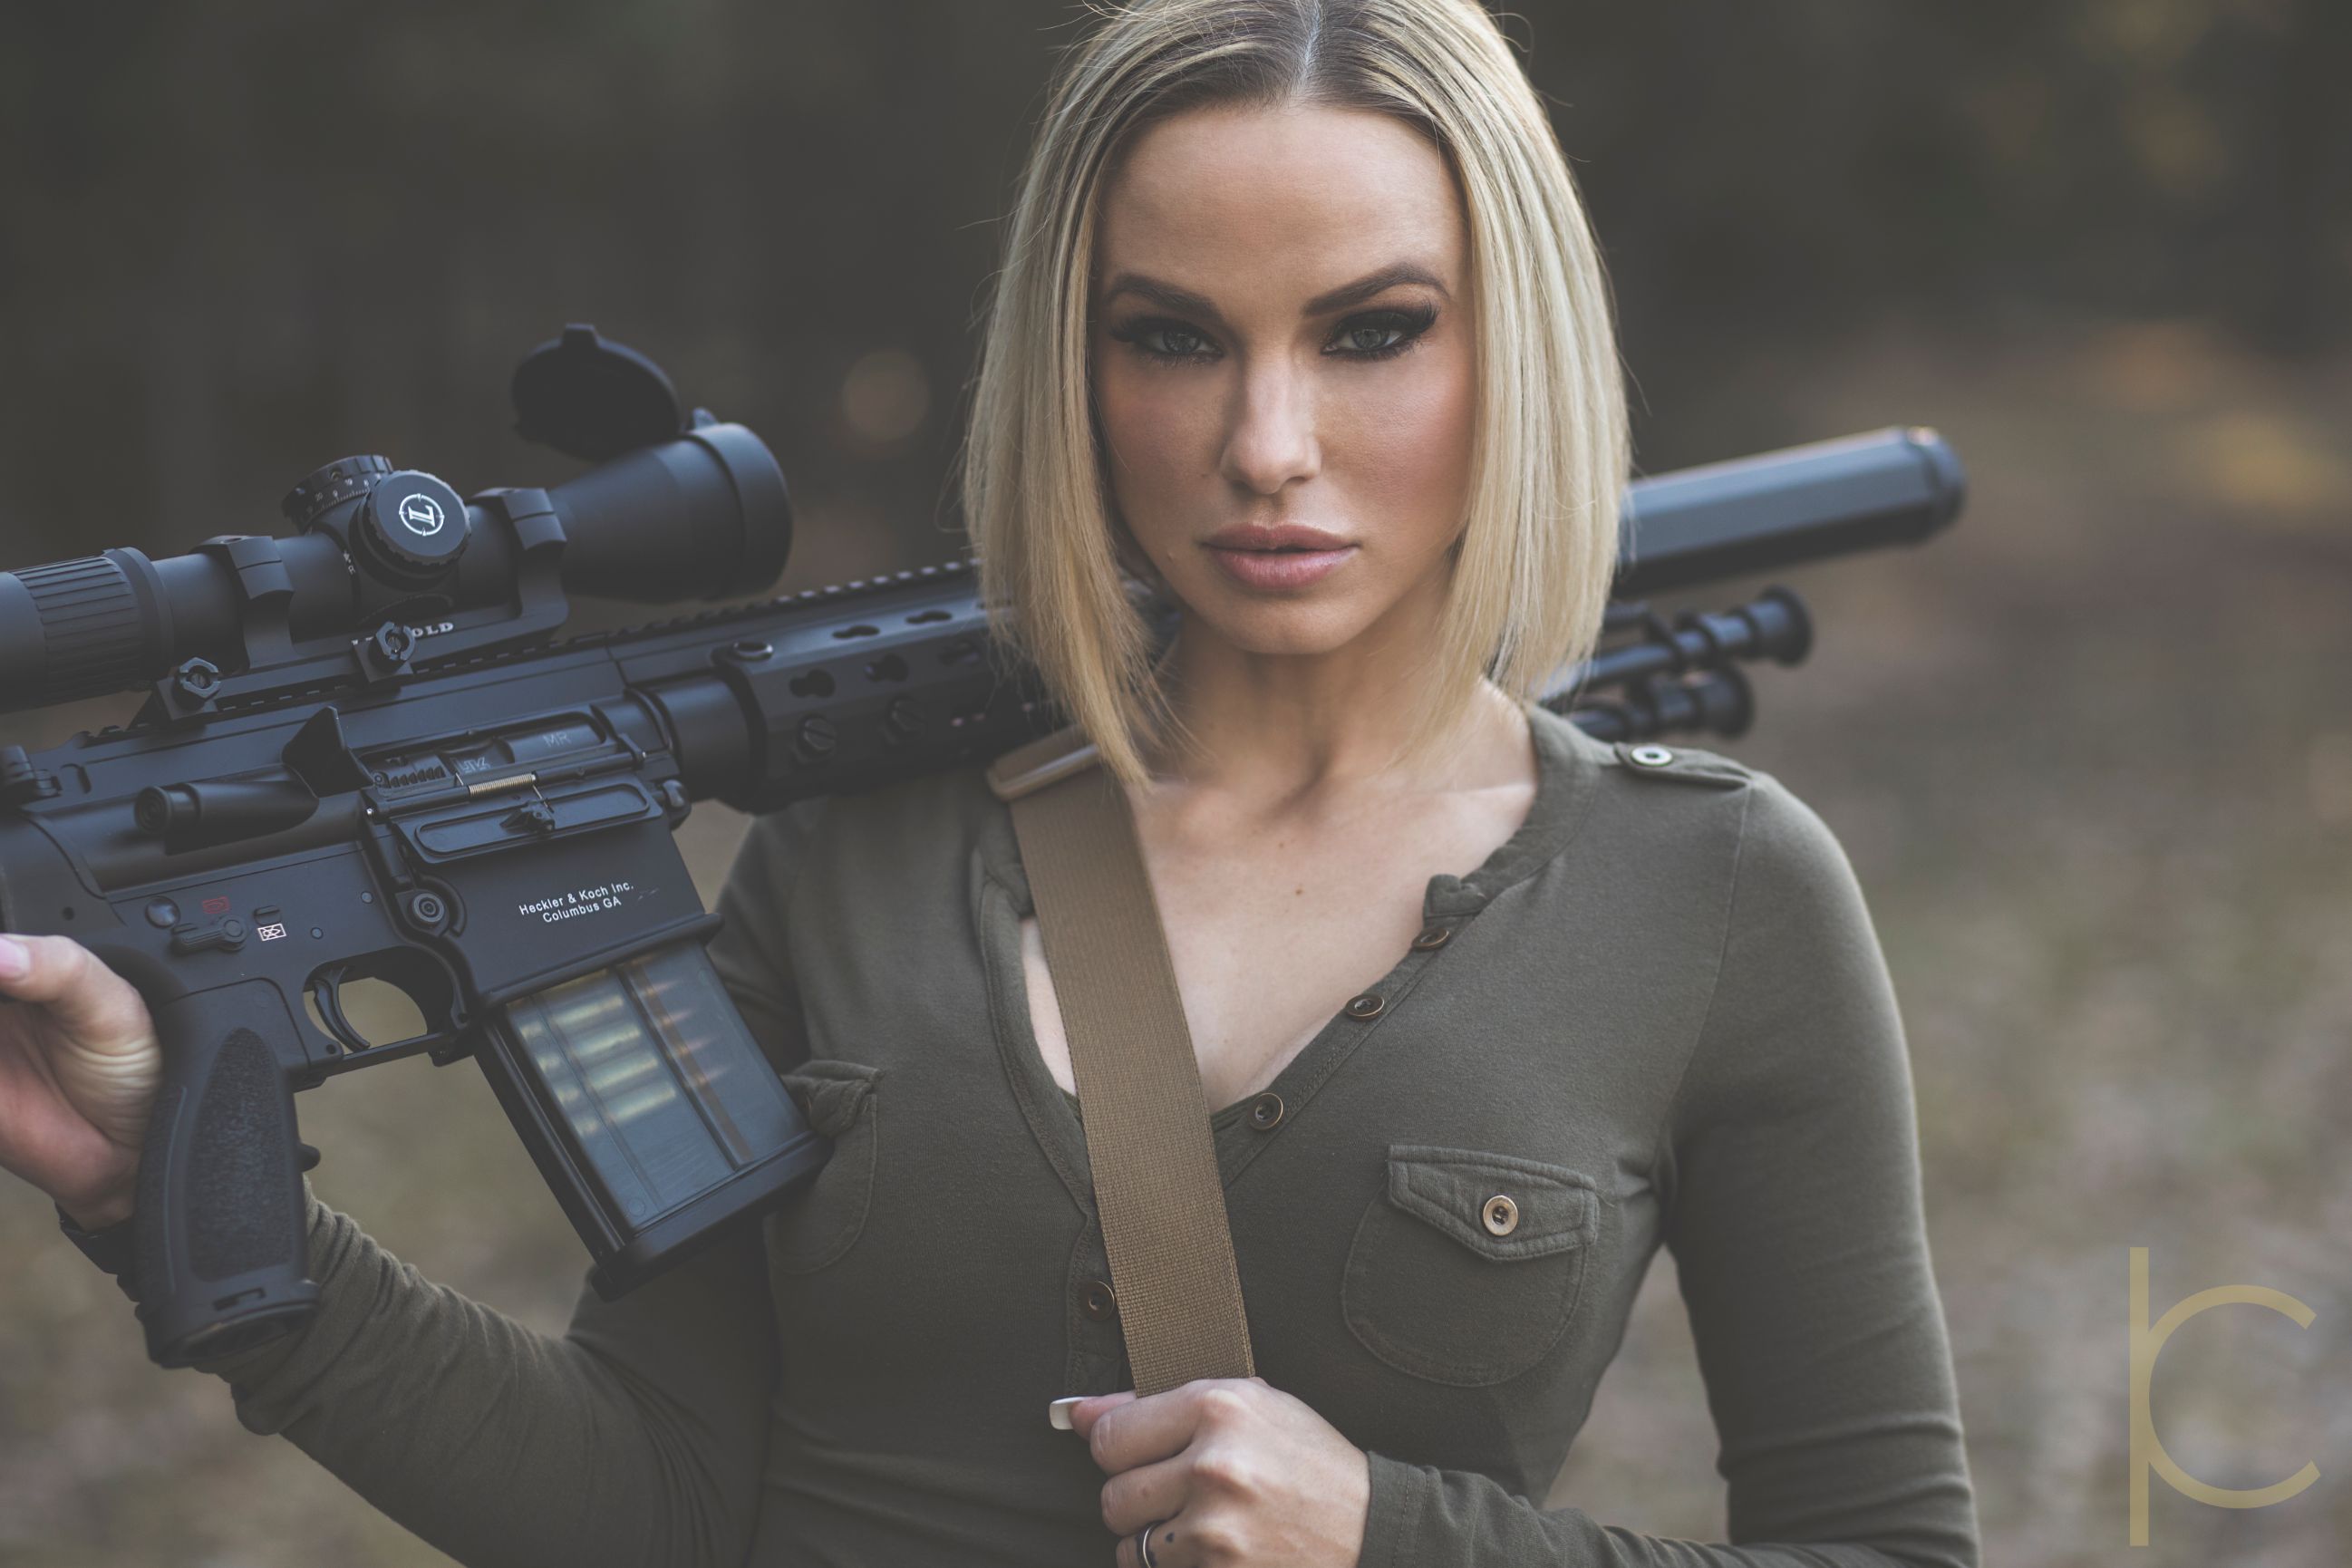 Heckler And Koch Hk417 Kimberly Matte Girls With